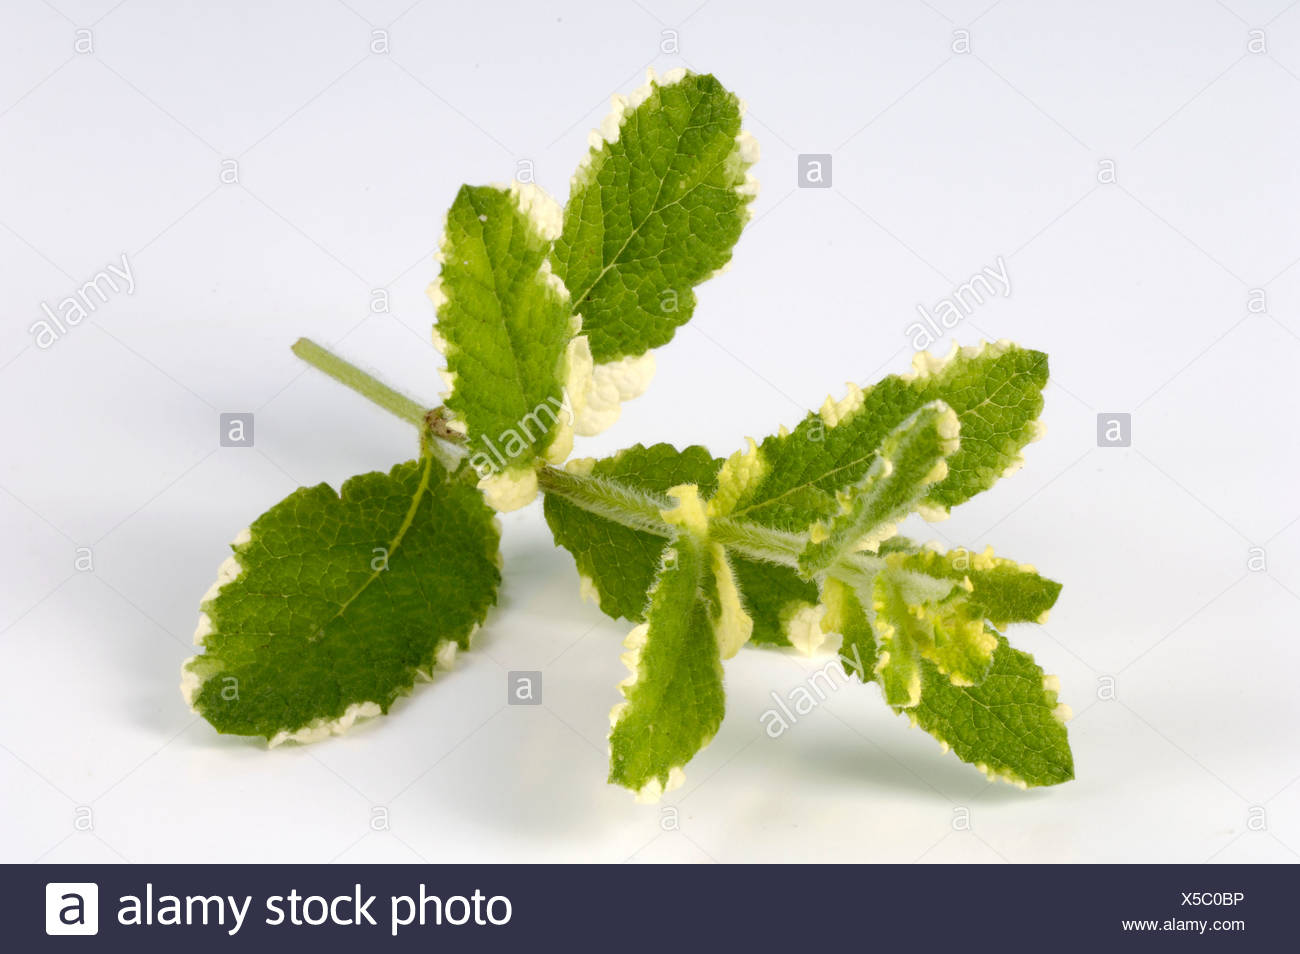 Round Leaved Mint Stock Photos Round Leaved Mint Stock Images